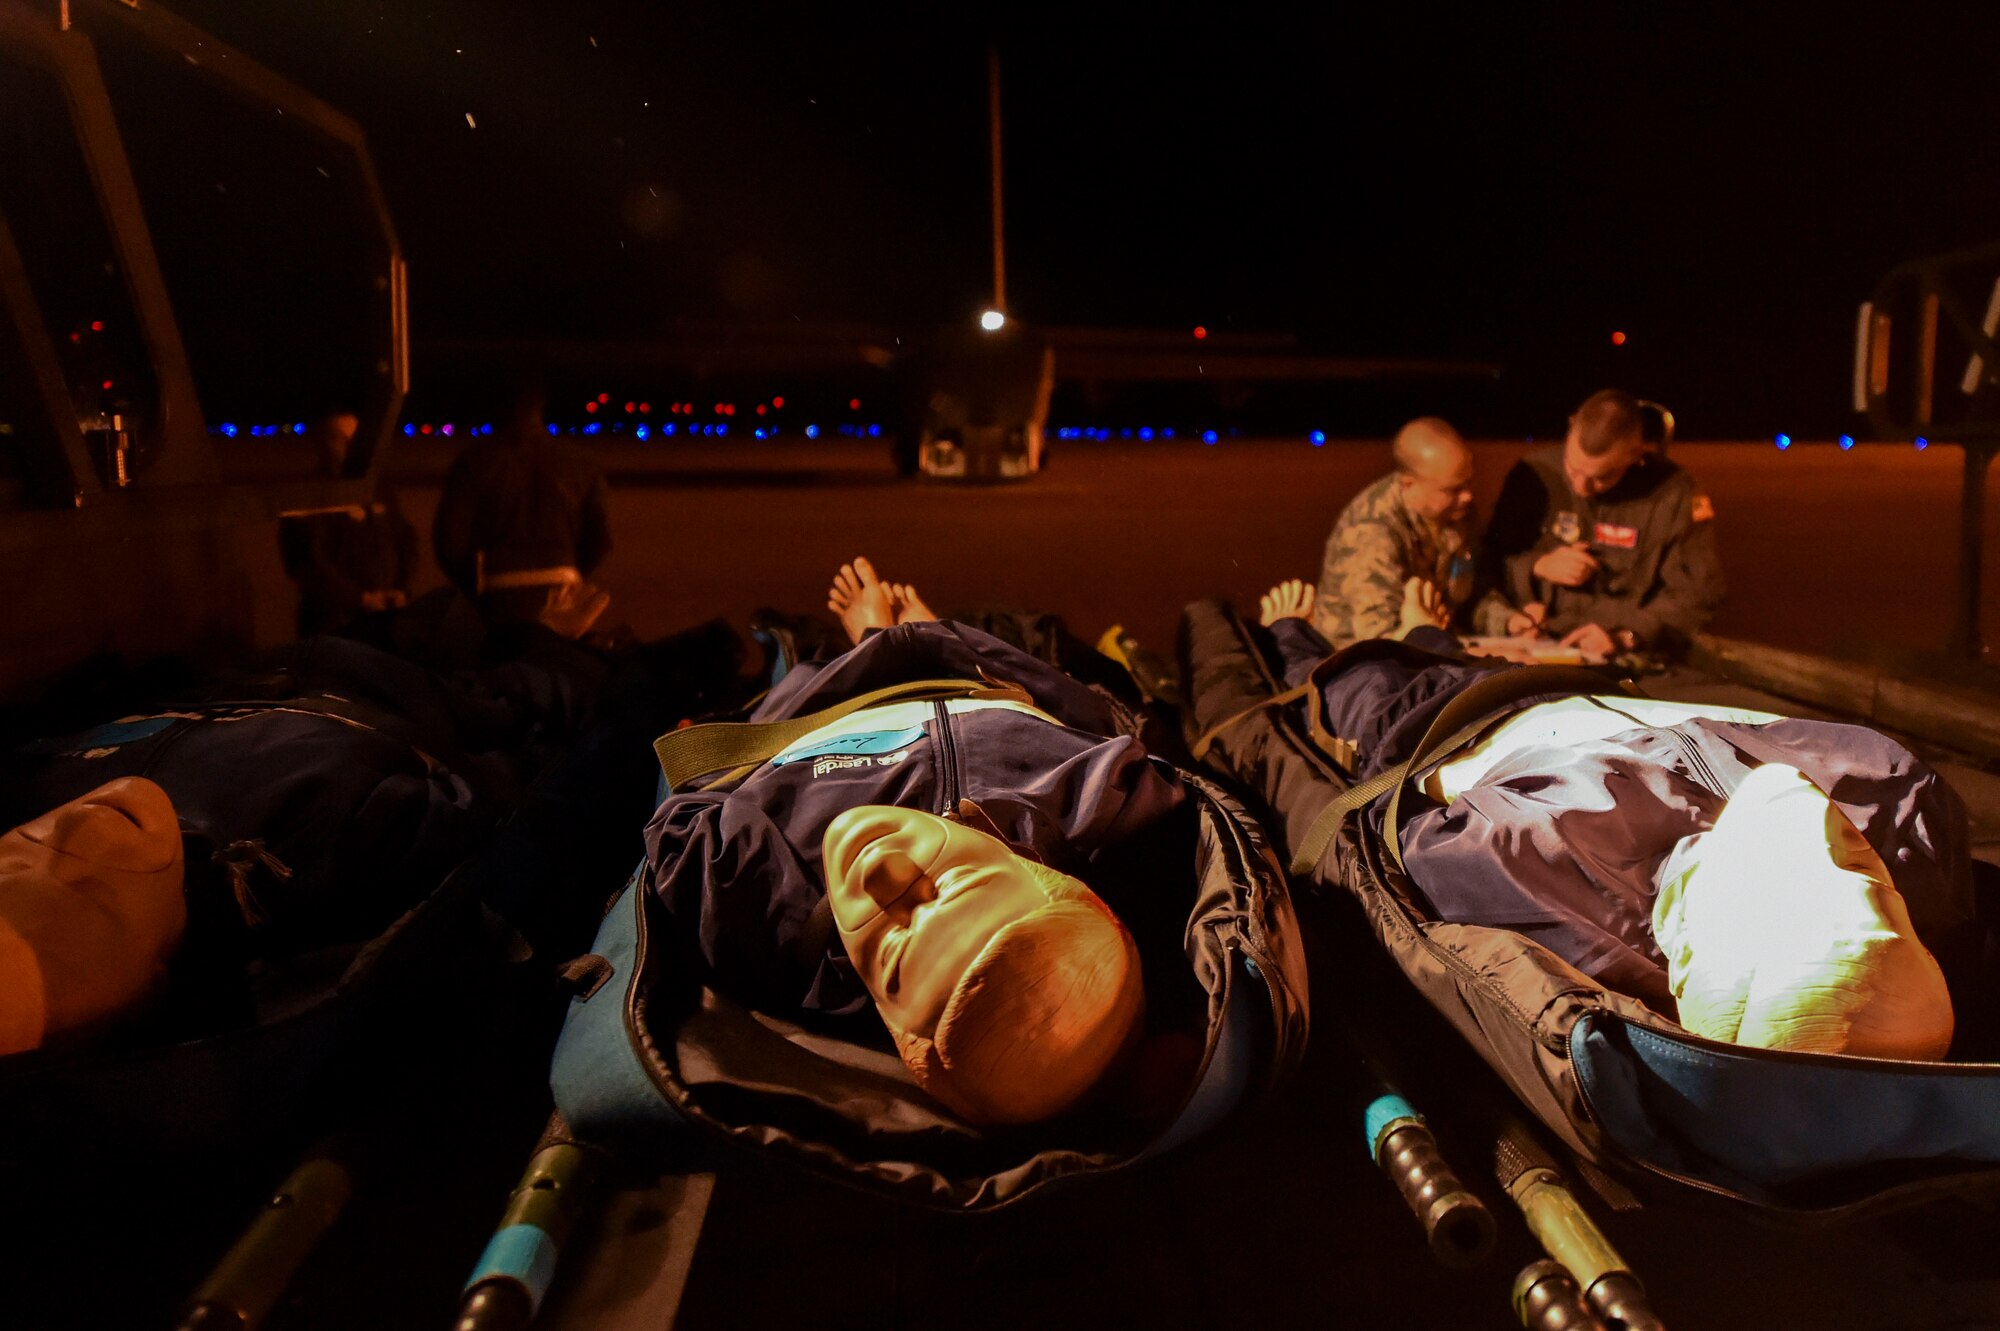 Simulated patients await evacuation as a team of medics from the 375th Aeromedical Evacuation Squadron discuss their plan to care for the patients during exercise Hurricane Greg, Nov. 8, 2016, at Alexandria, Louisiana.  The exercise was an example of how the U.S. Air Force provides support to local, state and federal authorities by performing a key role during crisis situations.  (U.S. Air Force Photo by Senior Airman Stephanie Serrano)